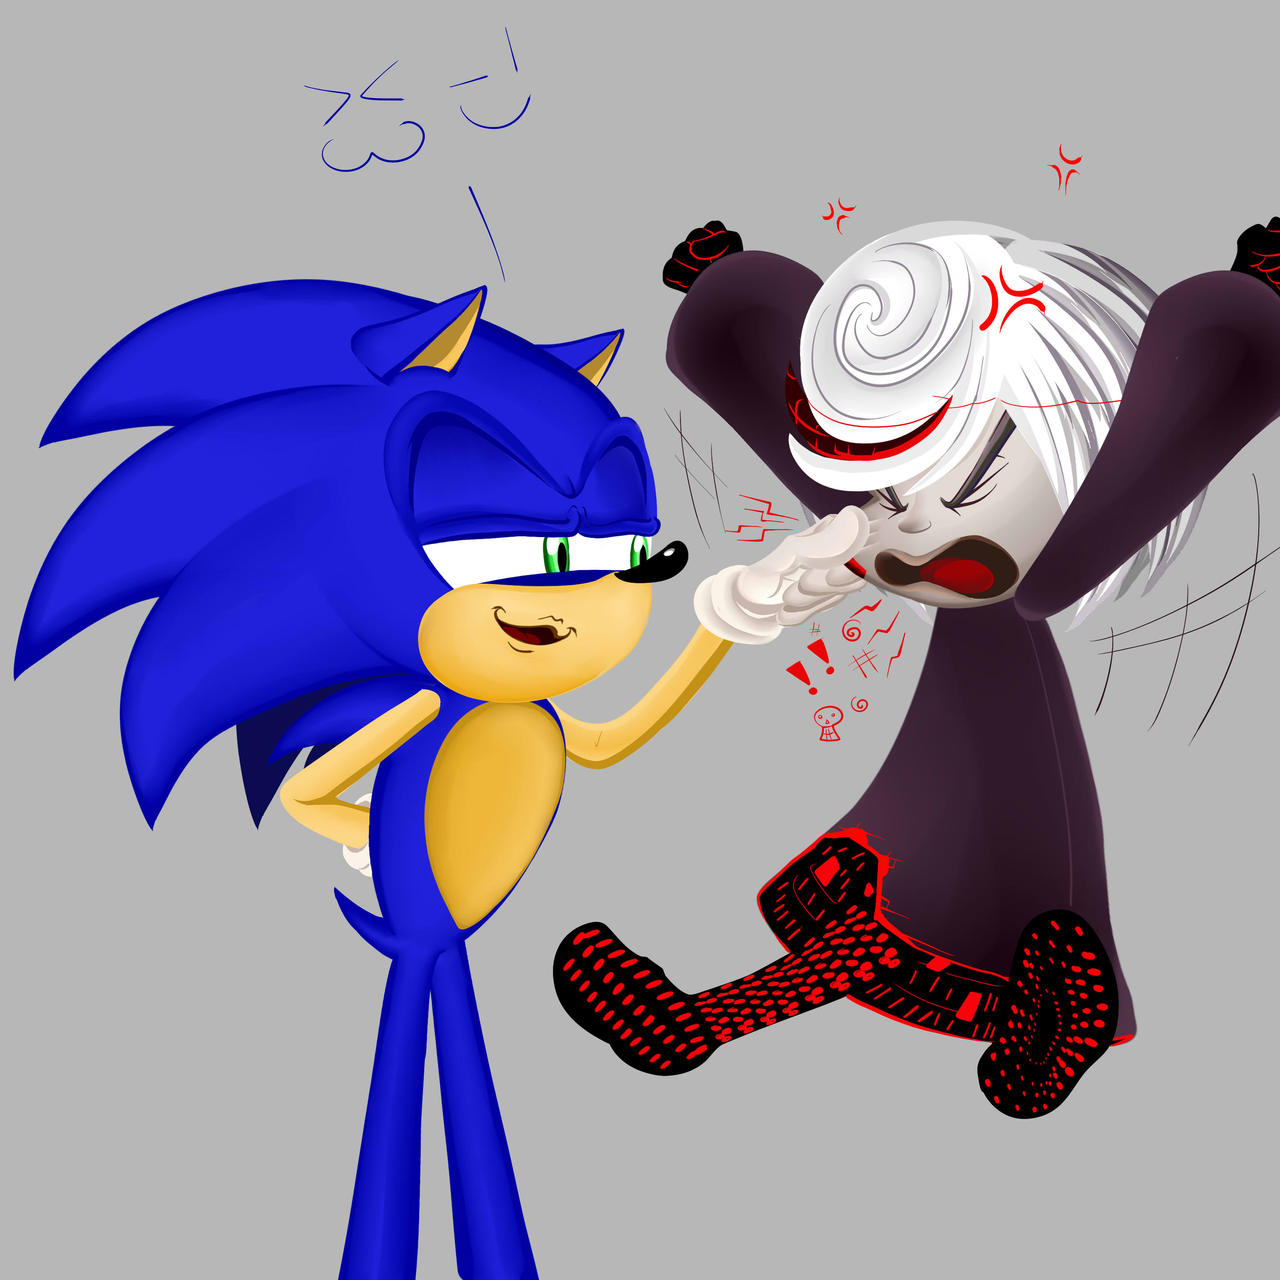 Sonic vs Sonic EXE by Stardust-Speedway on DeviantArt